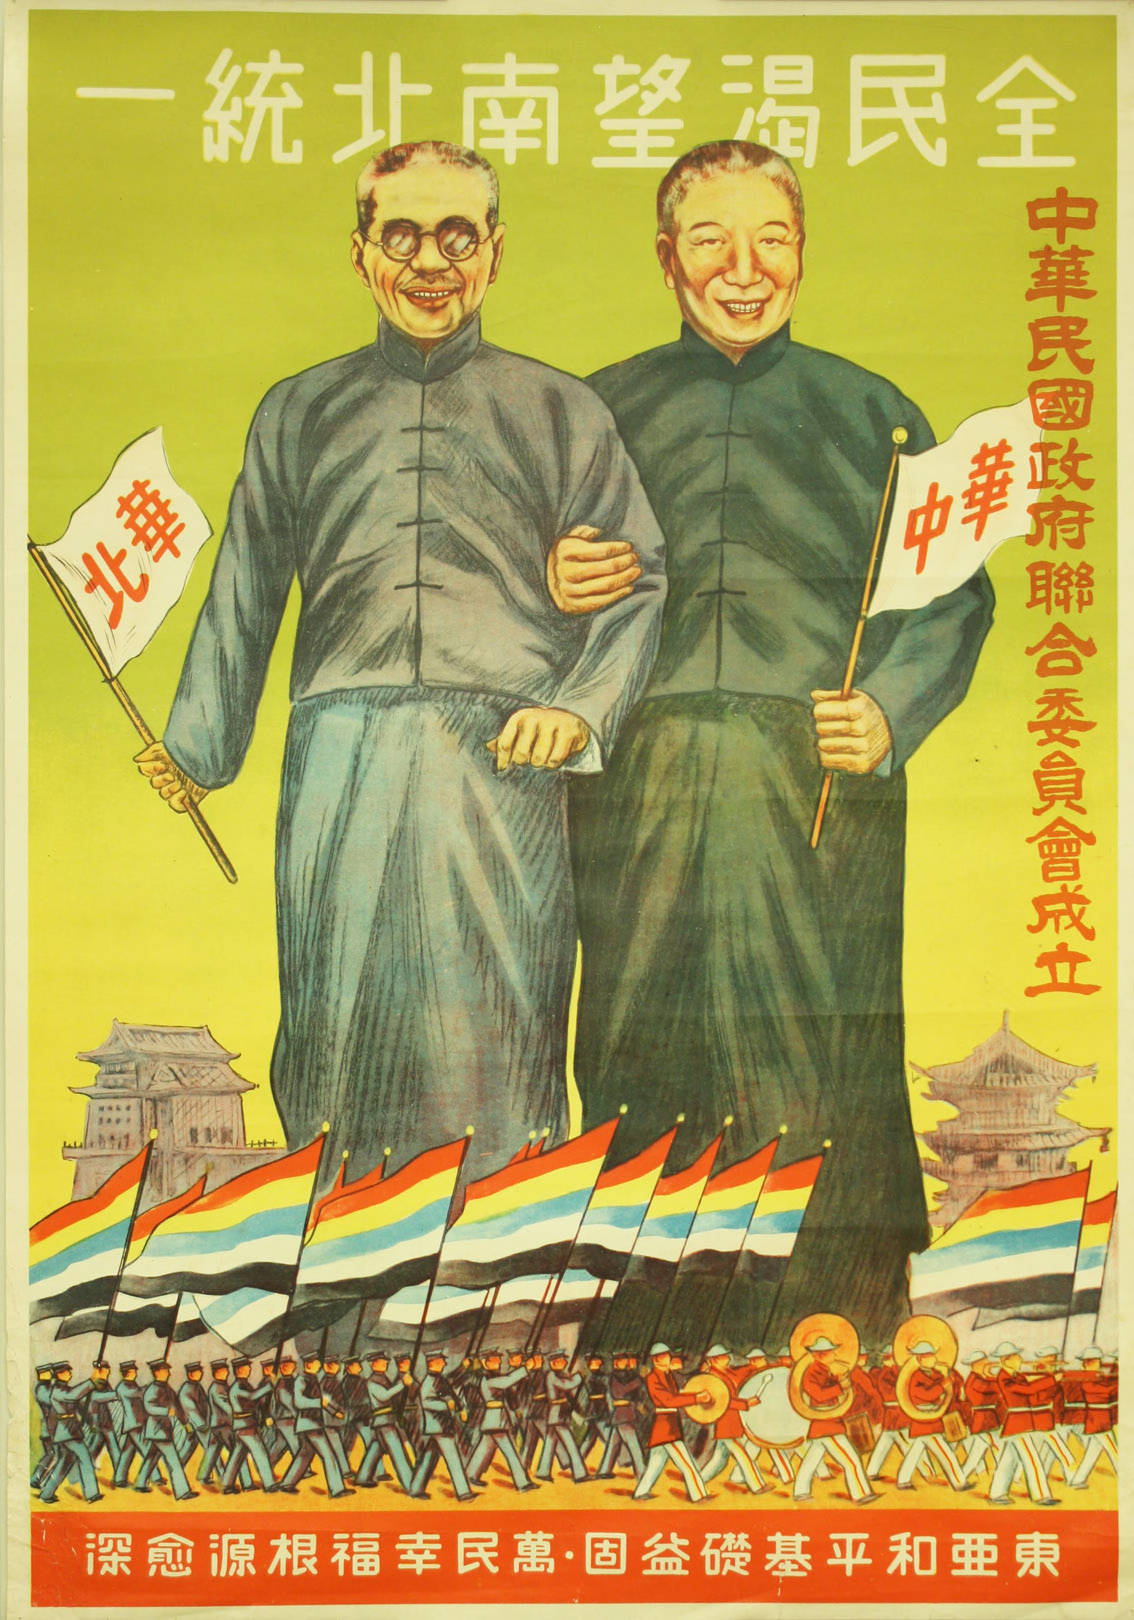 All people desire the NorthSouth unification 全民渴望南北統一.jpg